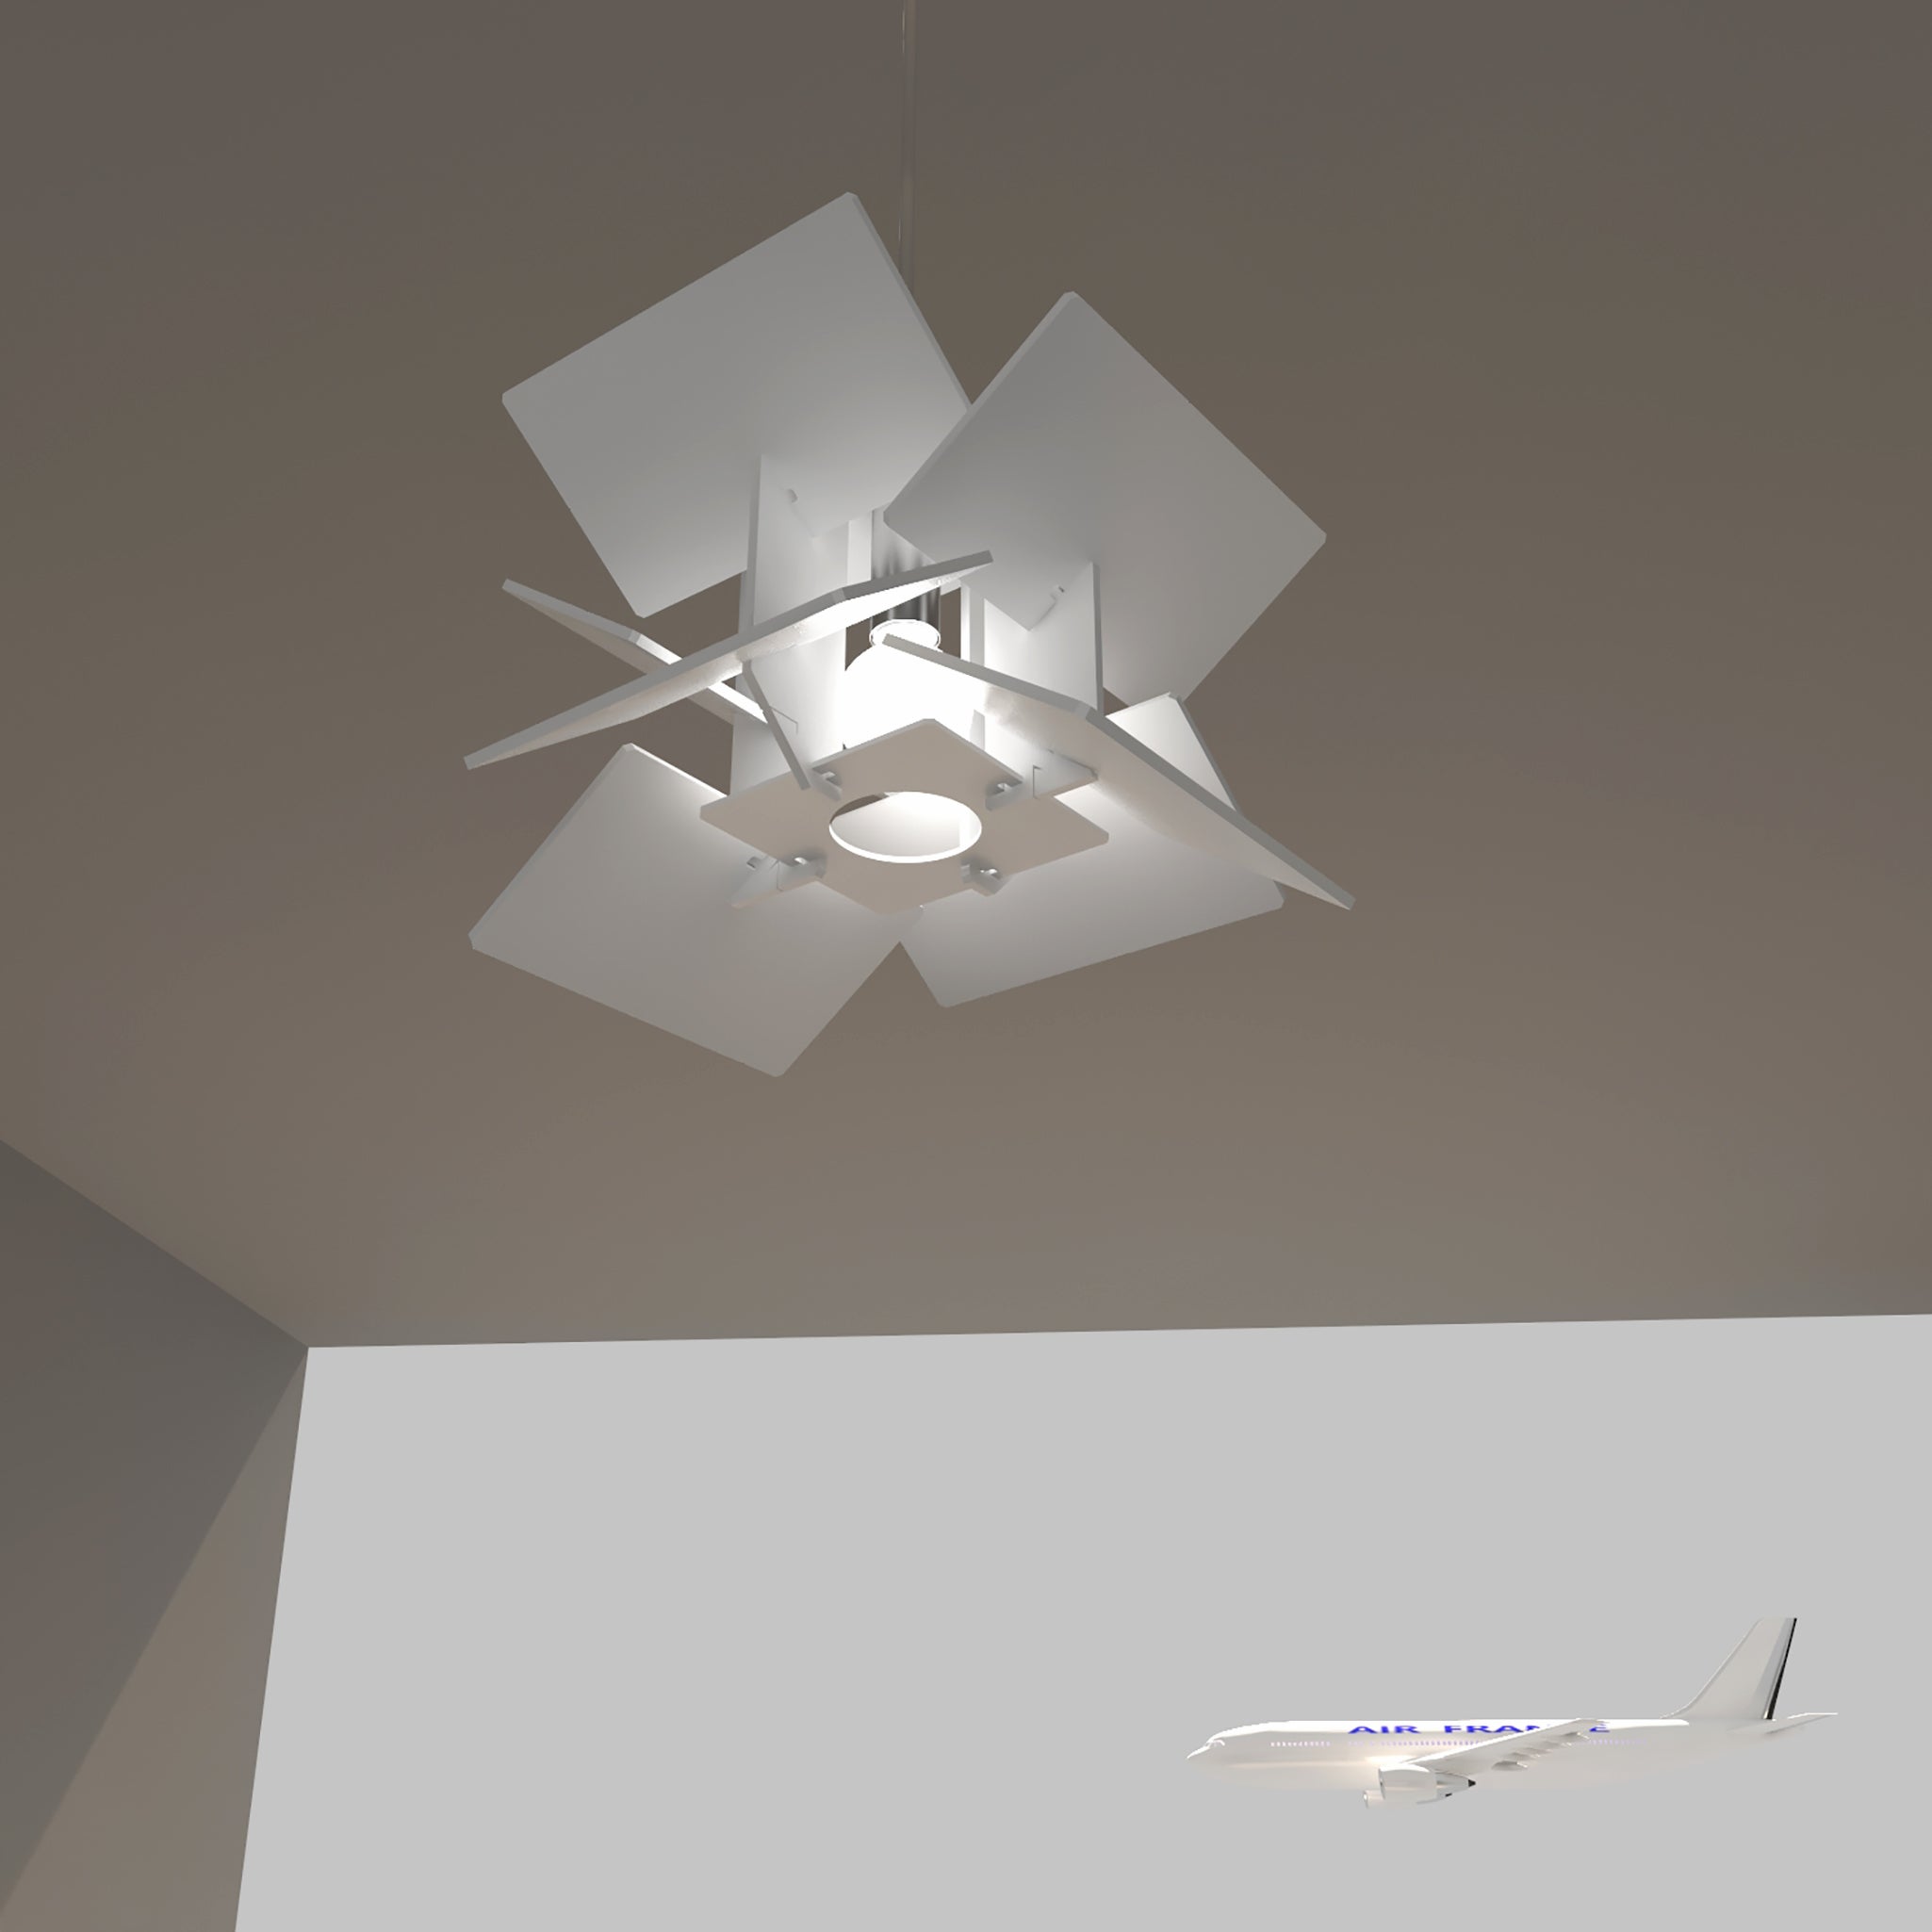 Ceiling pendant light in white for home and offis. Small pendant lamp "Galaxy-E14-White" from lighting collection by Left Sun 